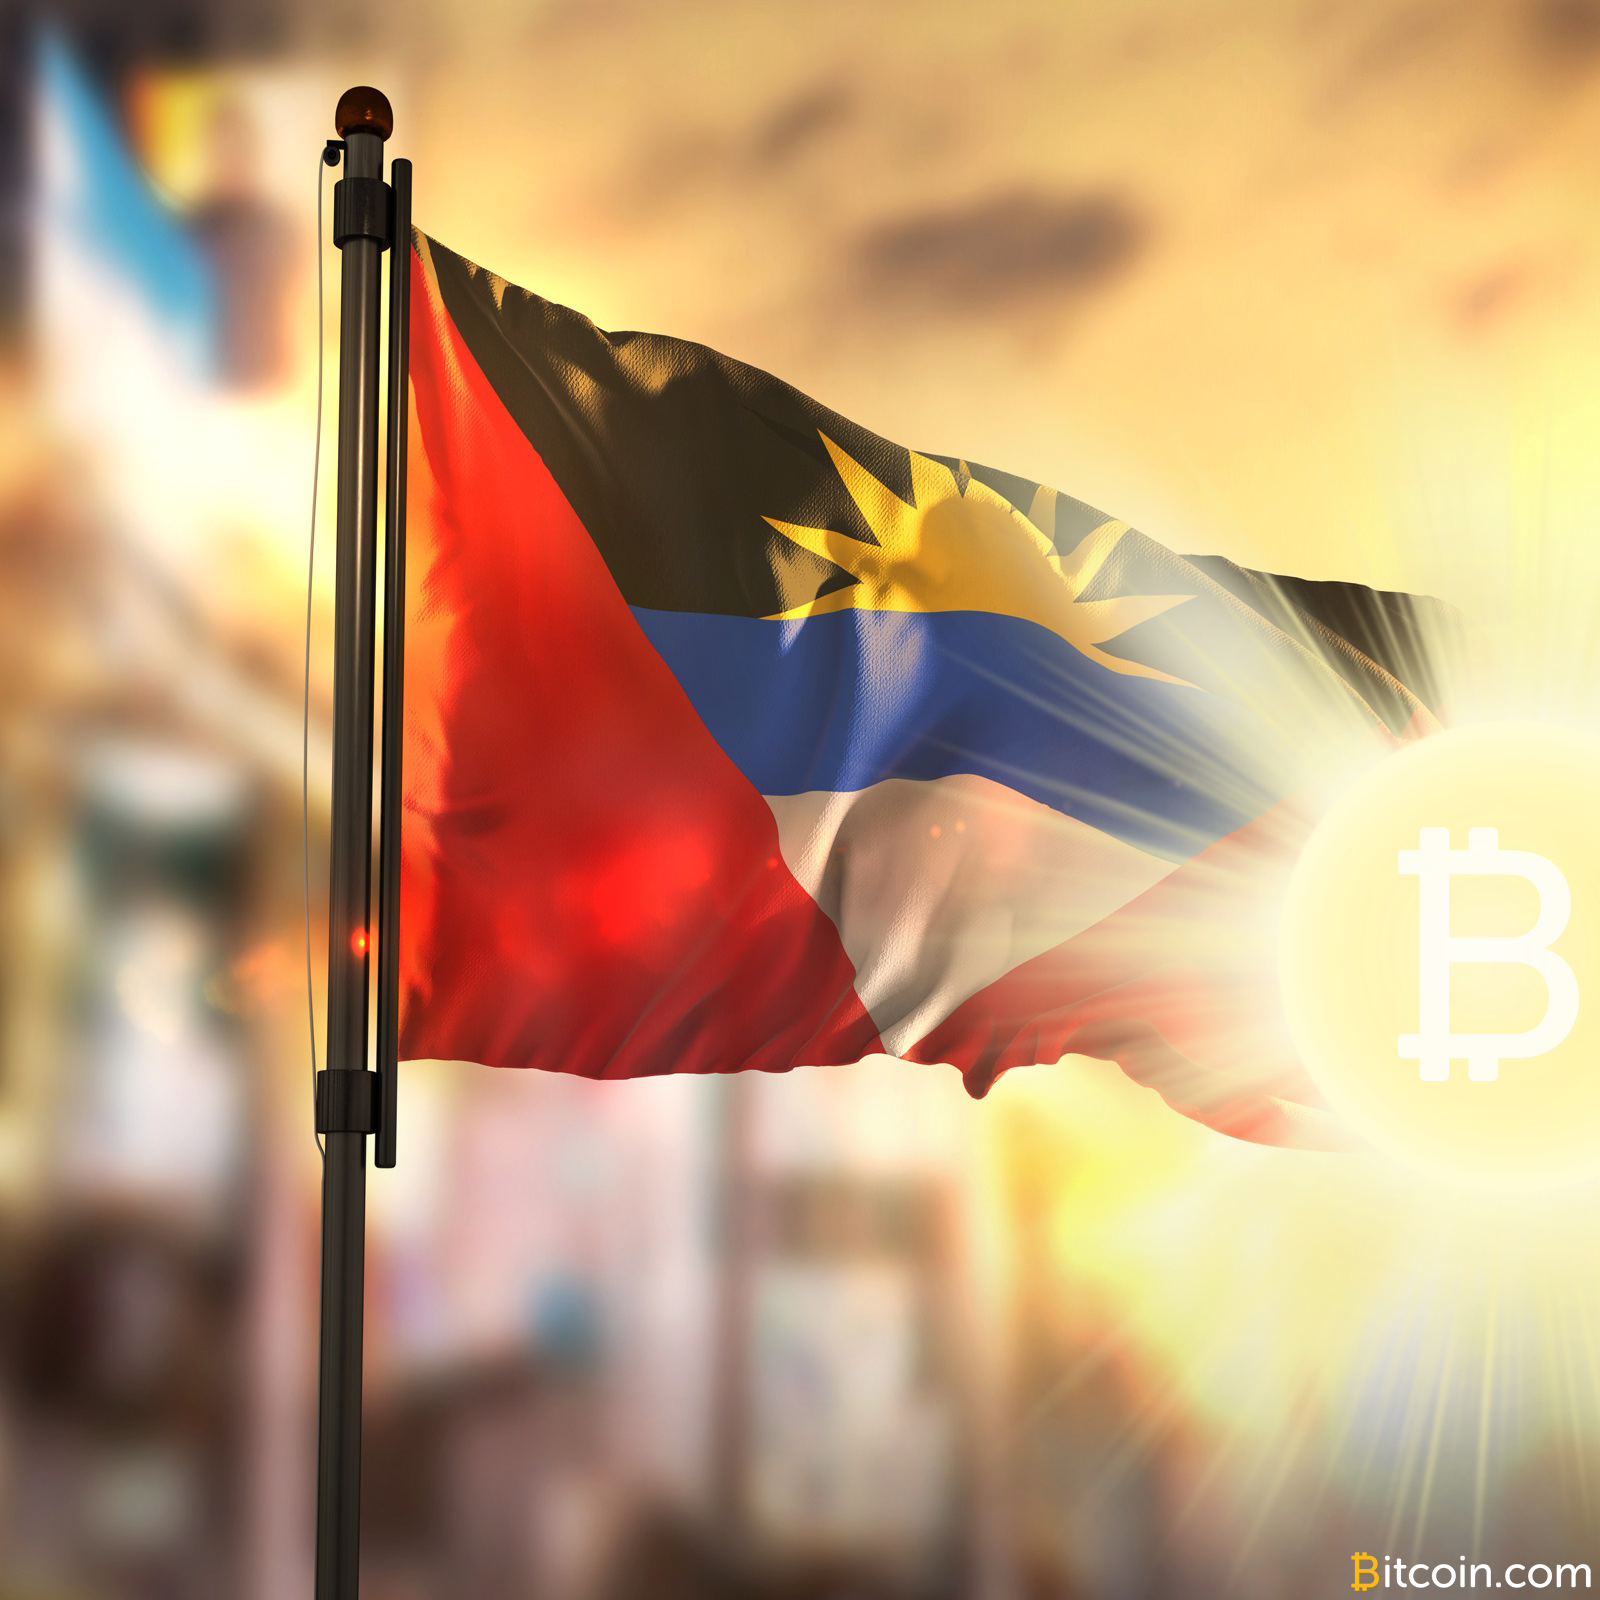 Bitcoin Proponent Calvin Ayre Appointed Economic Envoy for Antigua and Barbuda